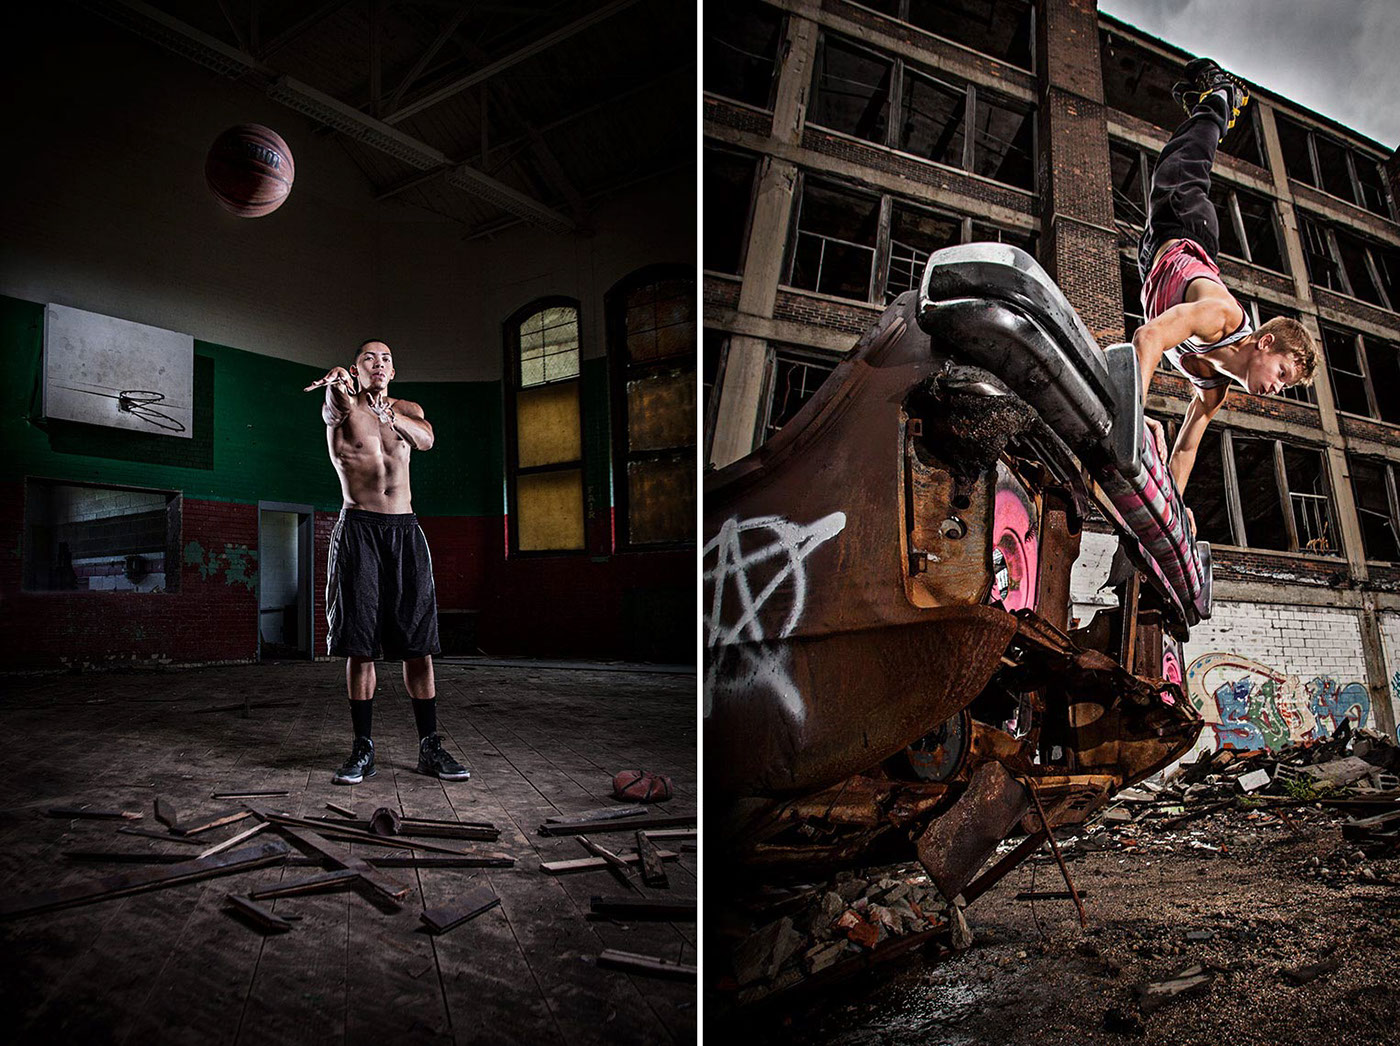 editorial athletes sports action adventure portraits location gritty